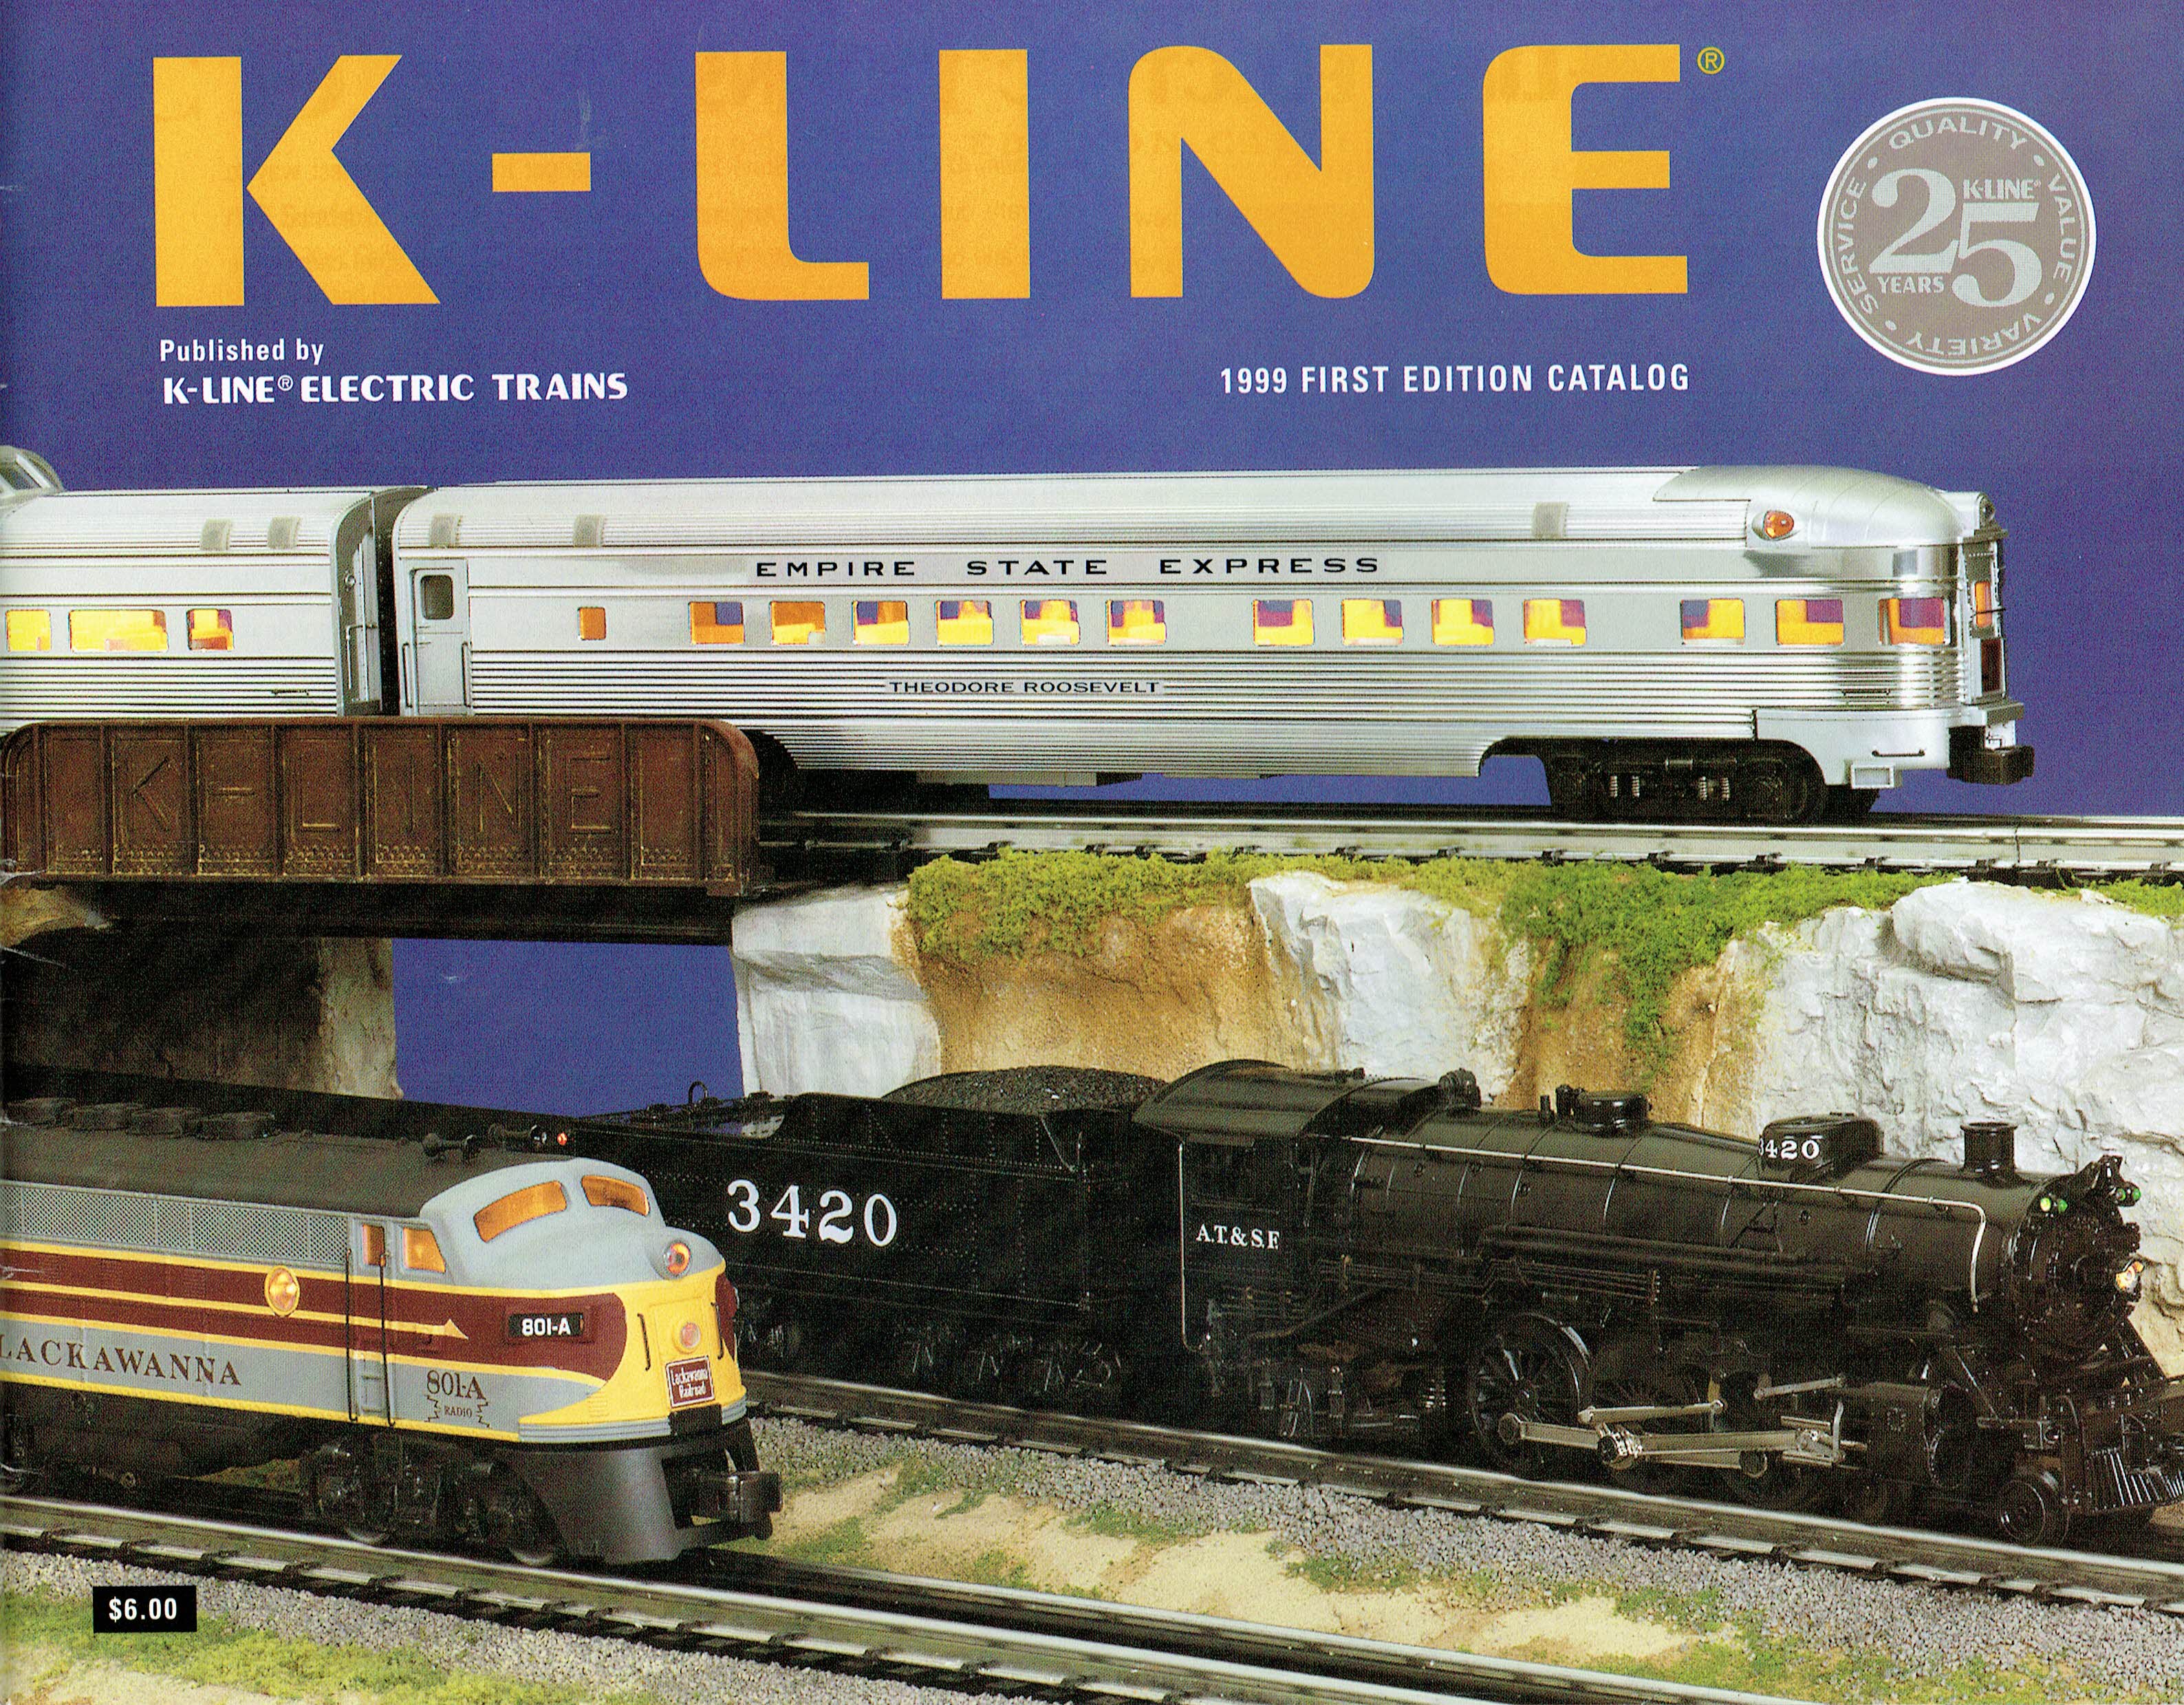 K-Line 1999 First Edition Catalog image